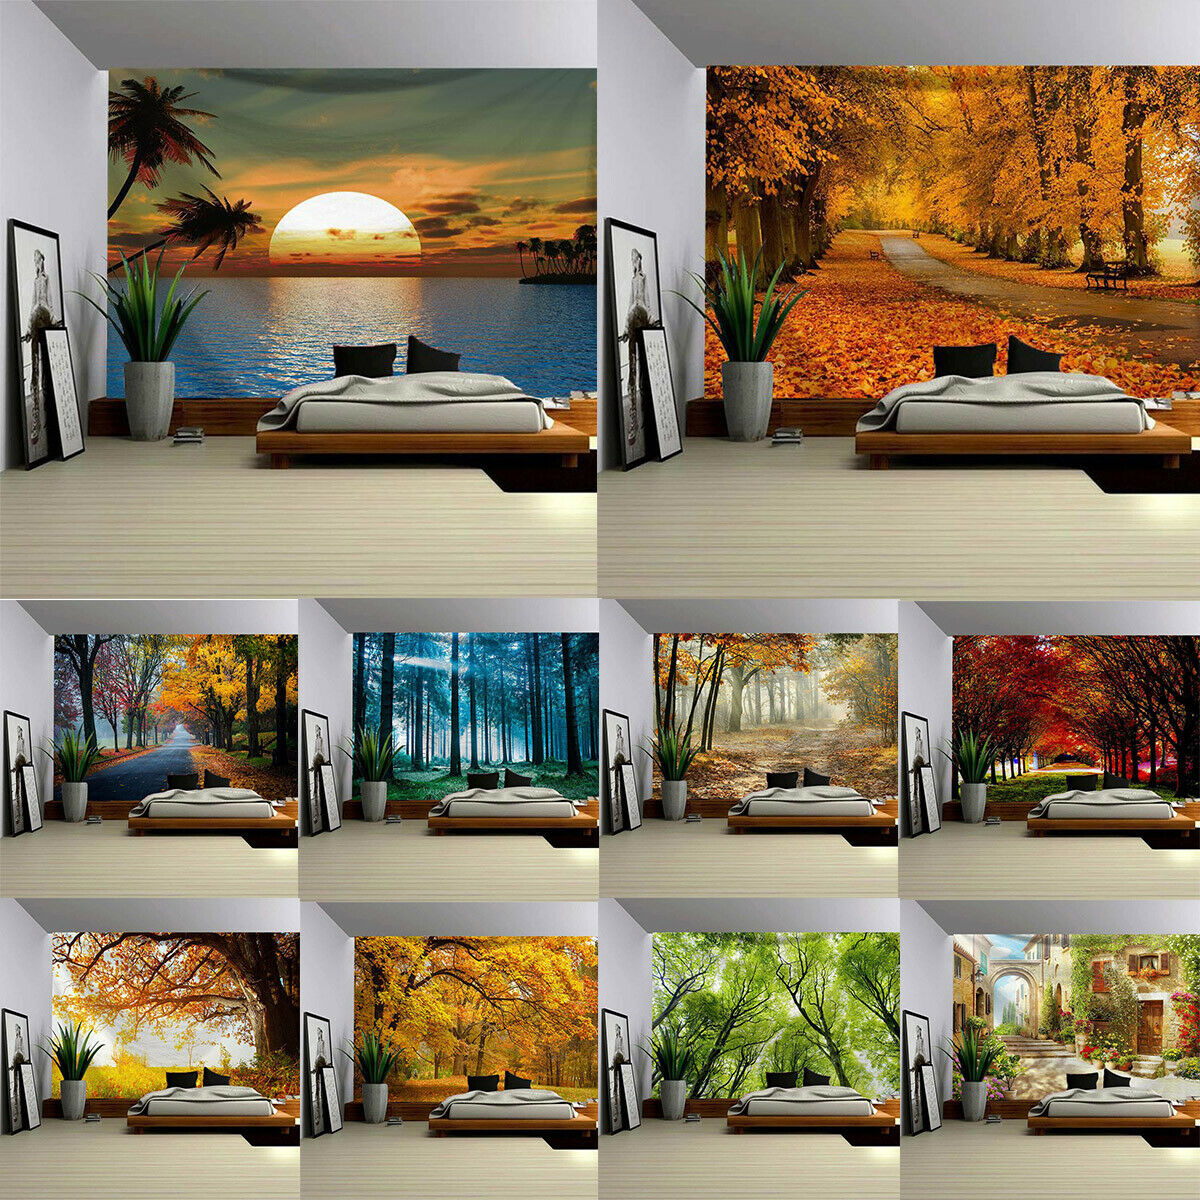 Seasonal Forest Landscape Cloth Painting Bedroom Decor Art Tapestry Wall Hanging